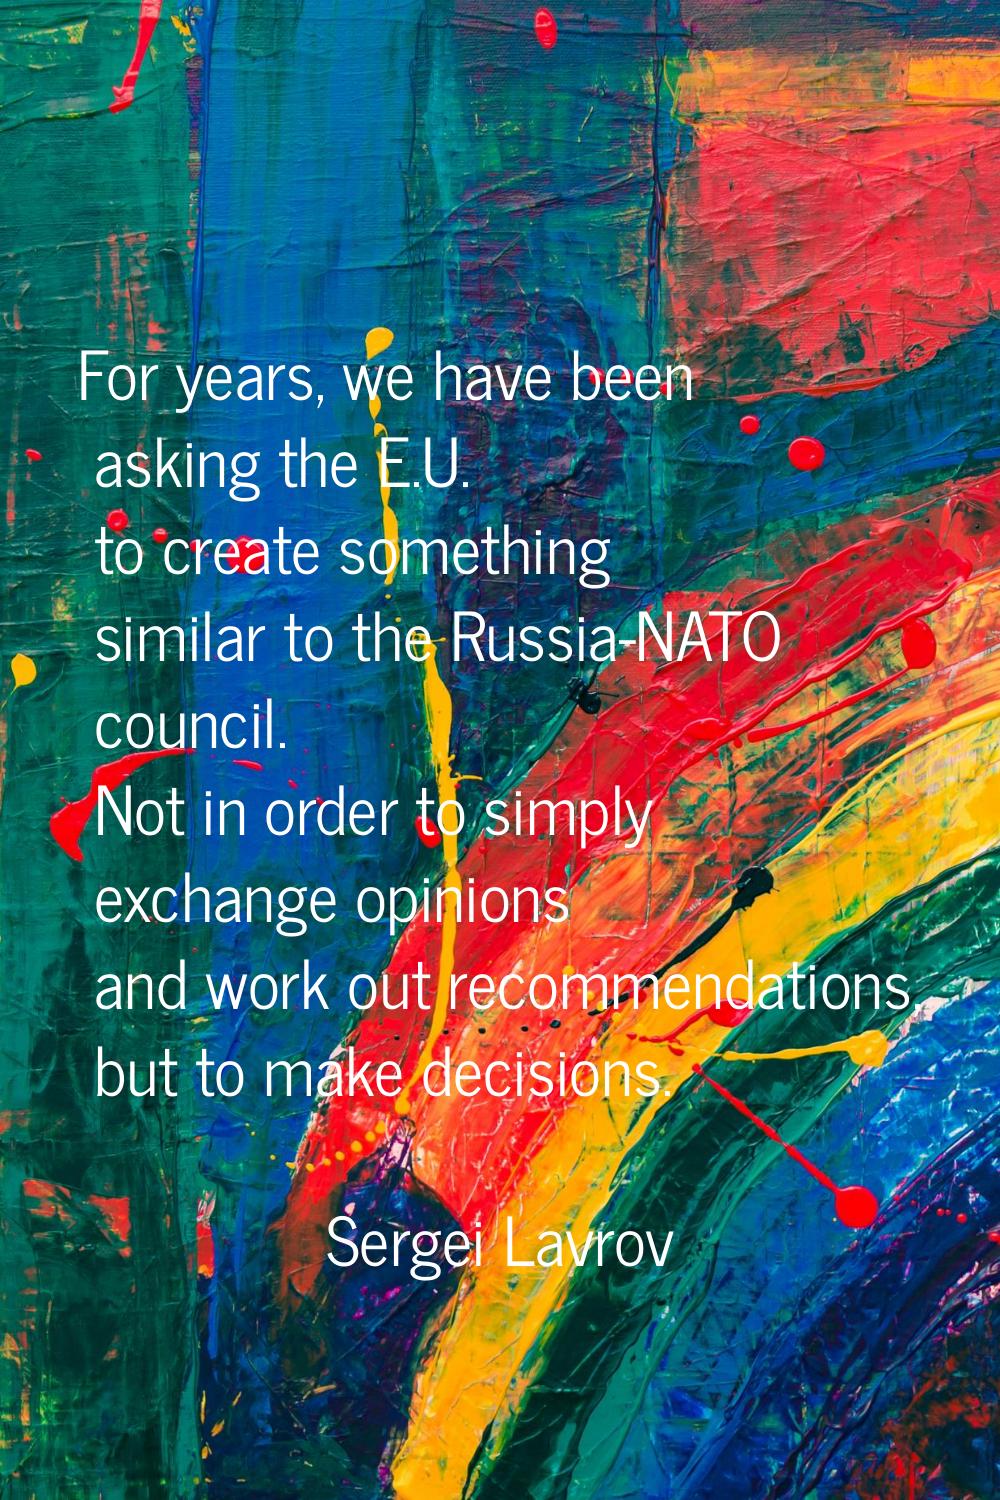 For years, we have been asking the E.U. to create something similar to the Russia-NATO council. Not